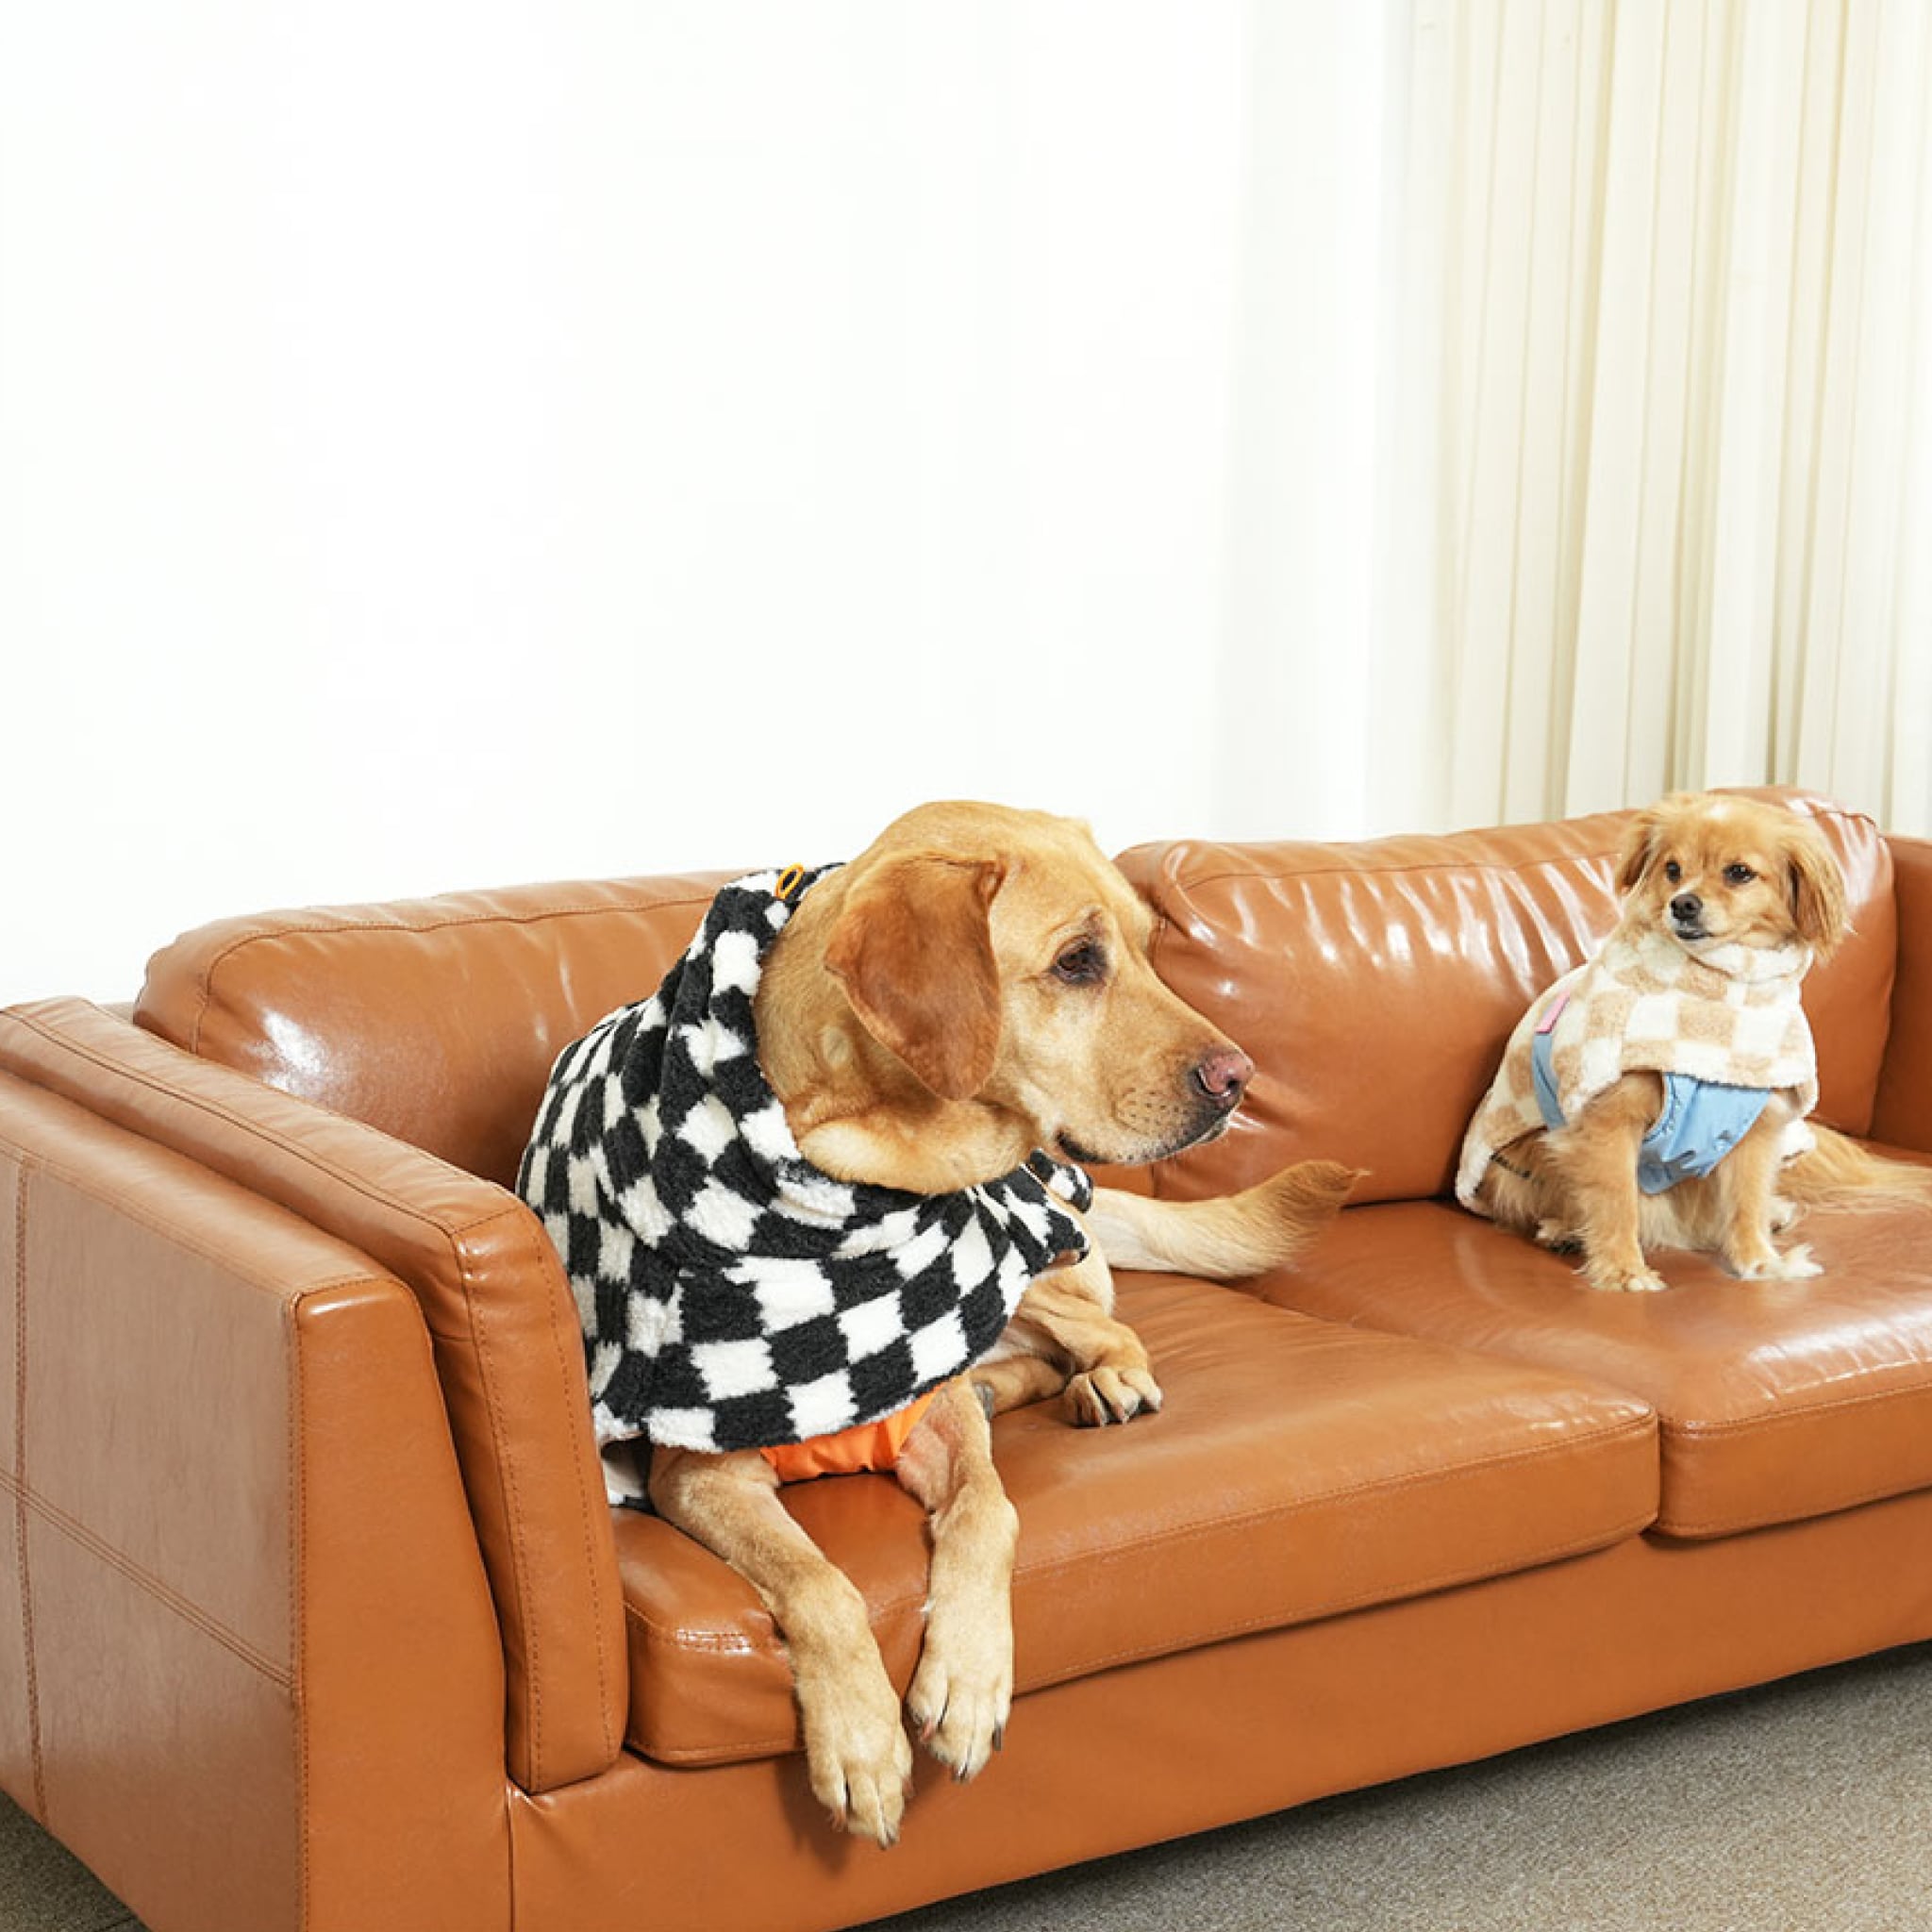 Small dog in beige and white chessboard fleece padding jacket and larger dog in black and white jacket.